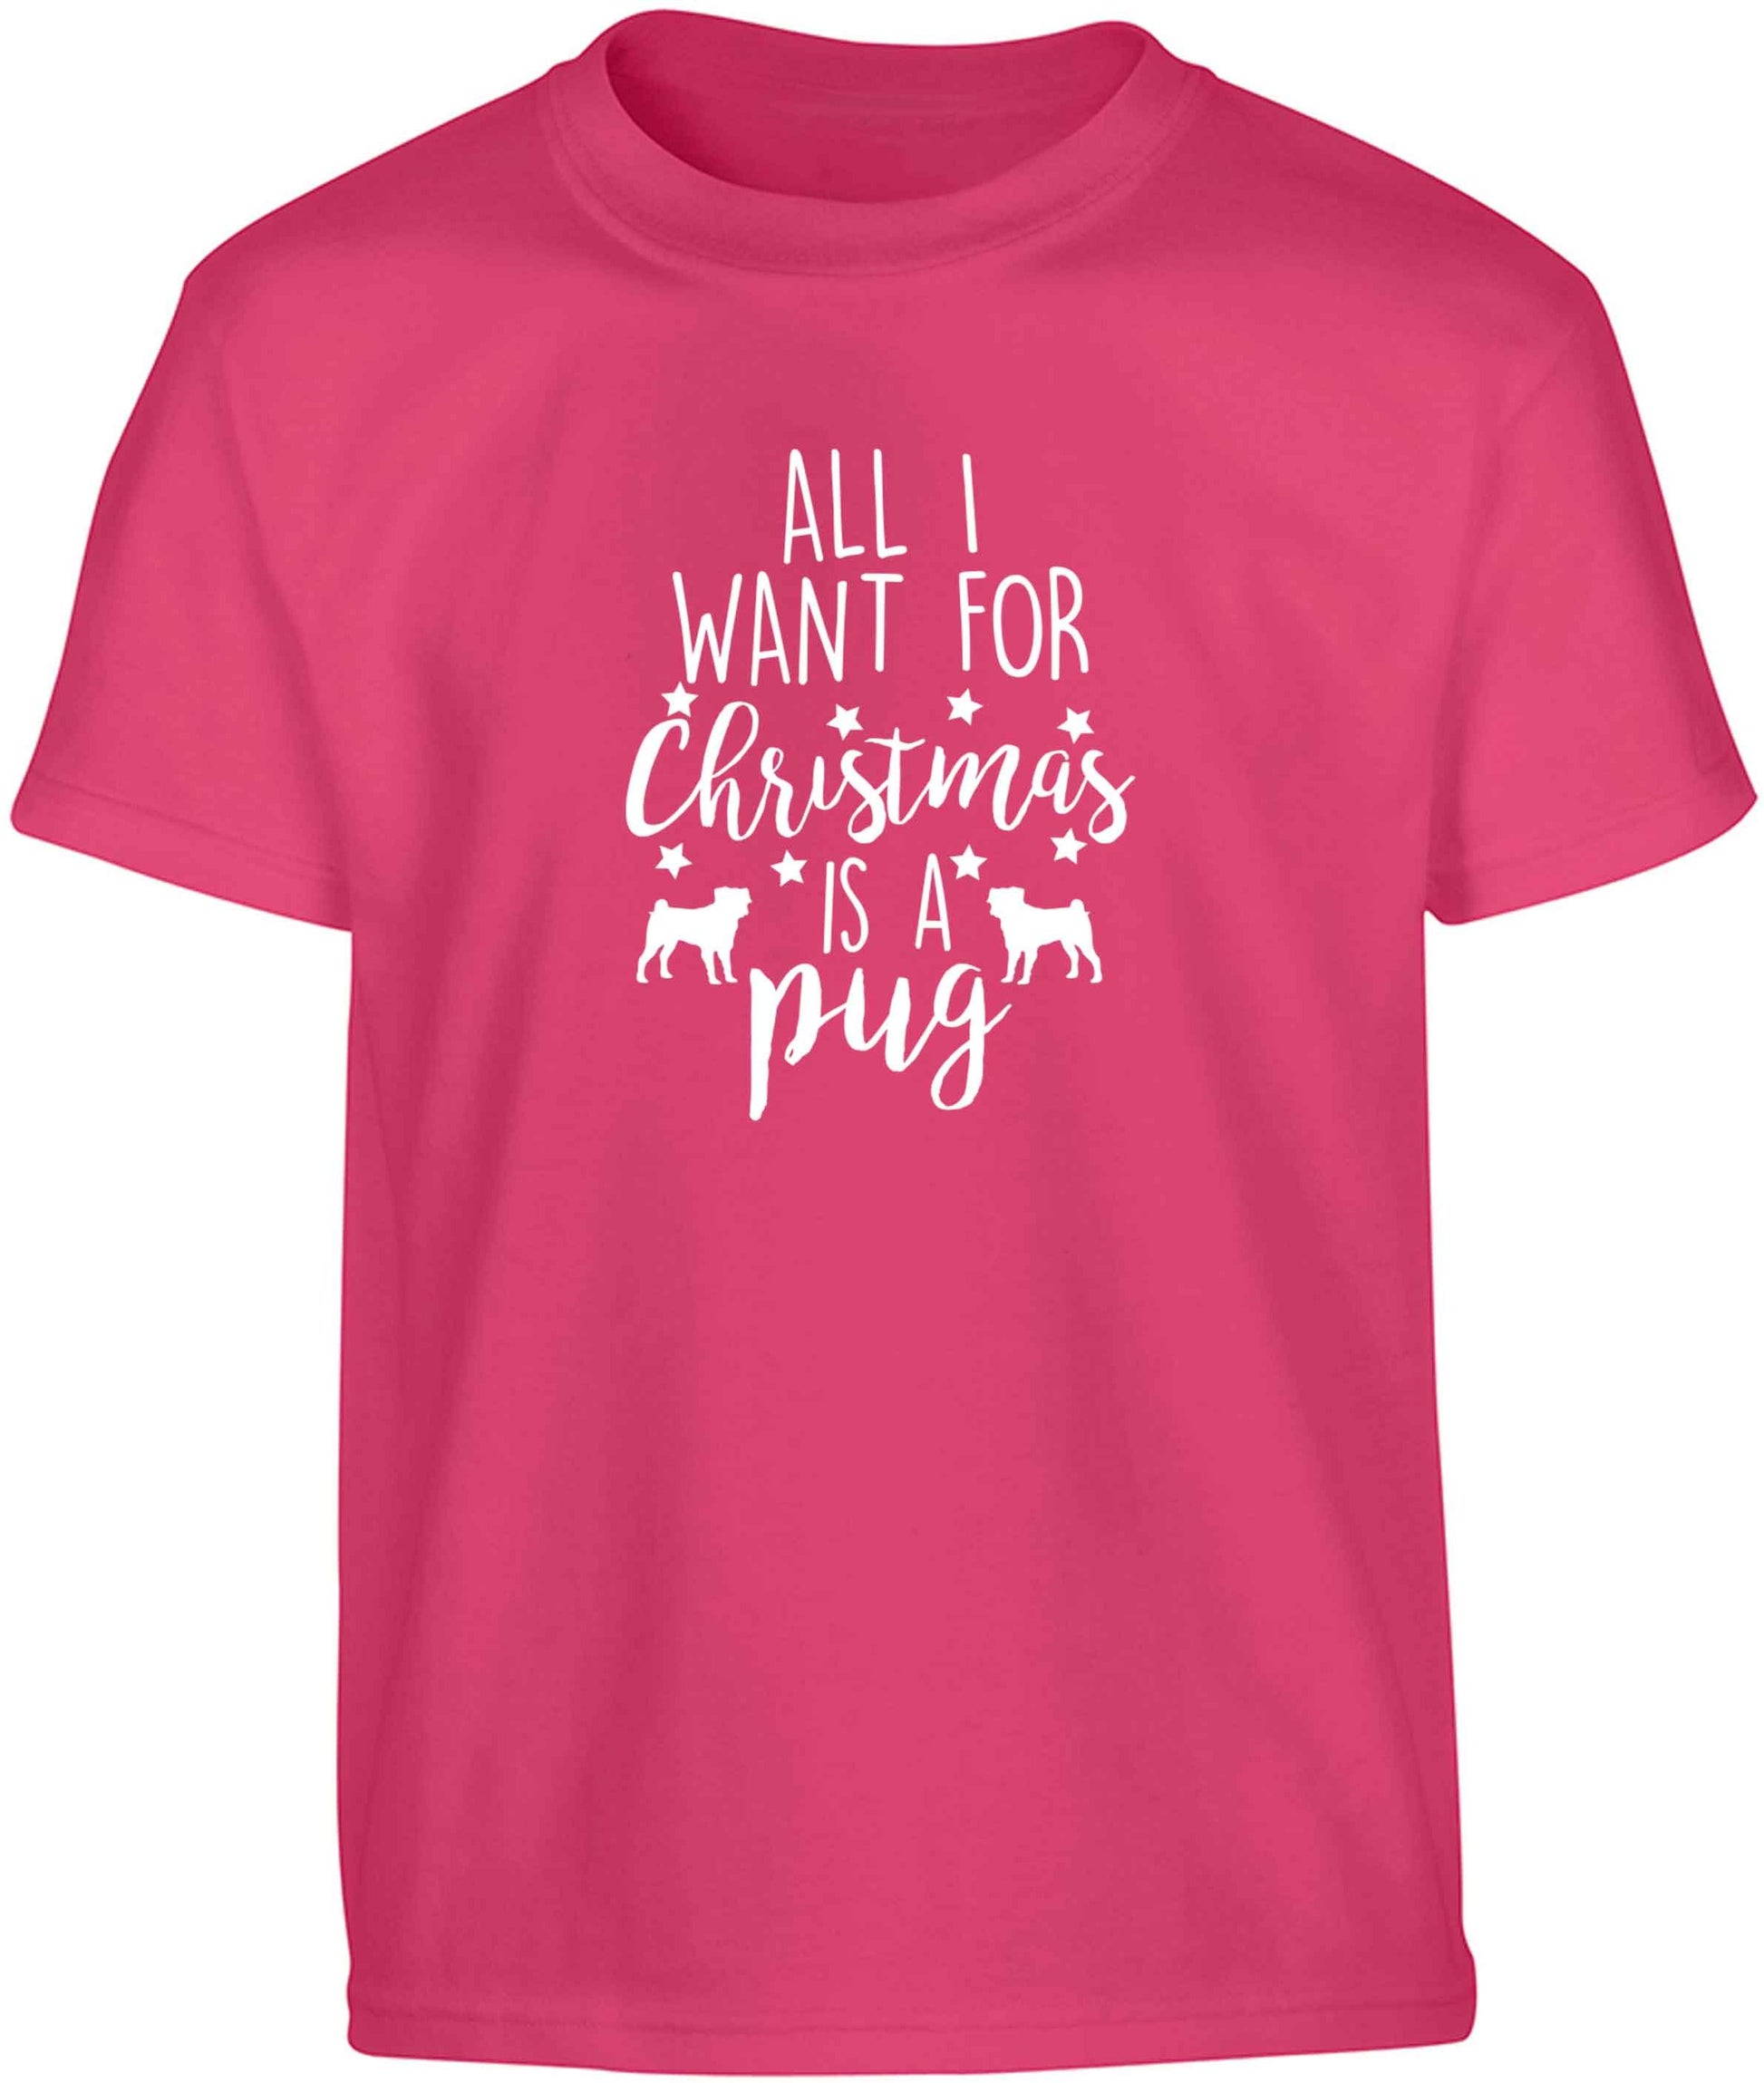 All I want for Christmas is a pug Children's pink Tshirt 12-13 Years